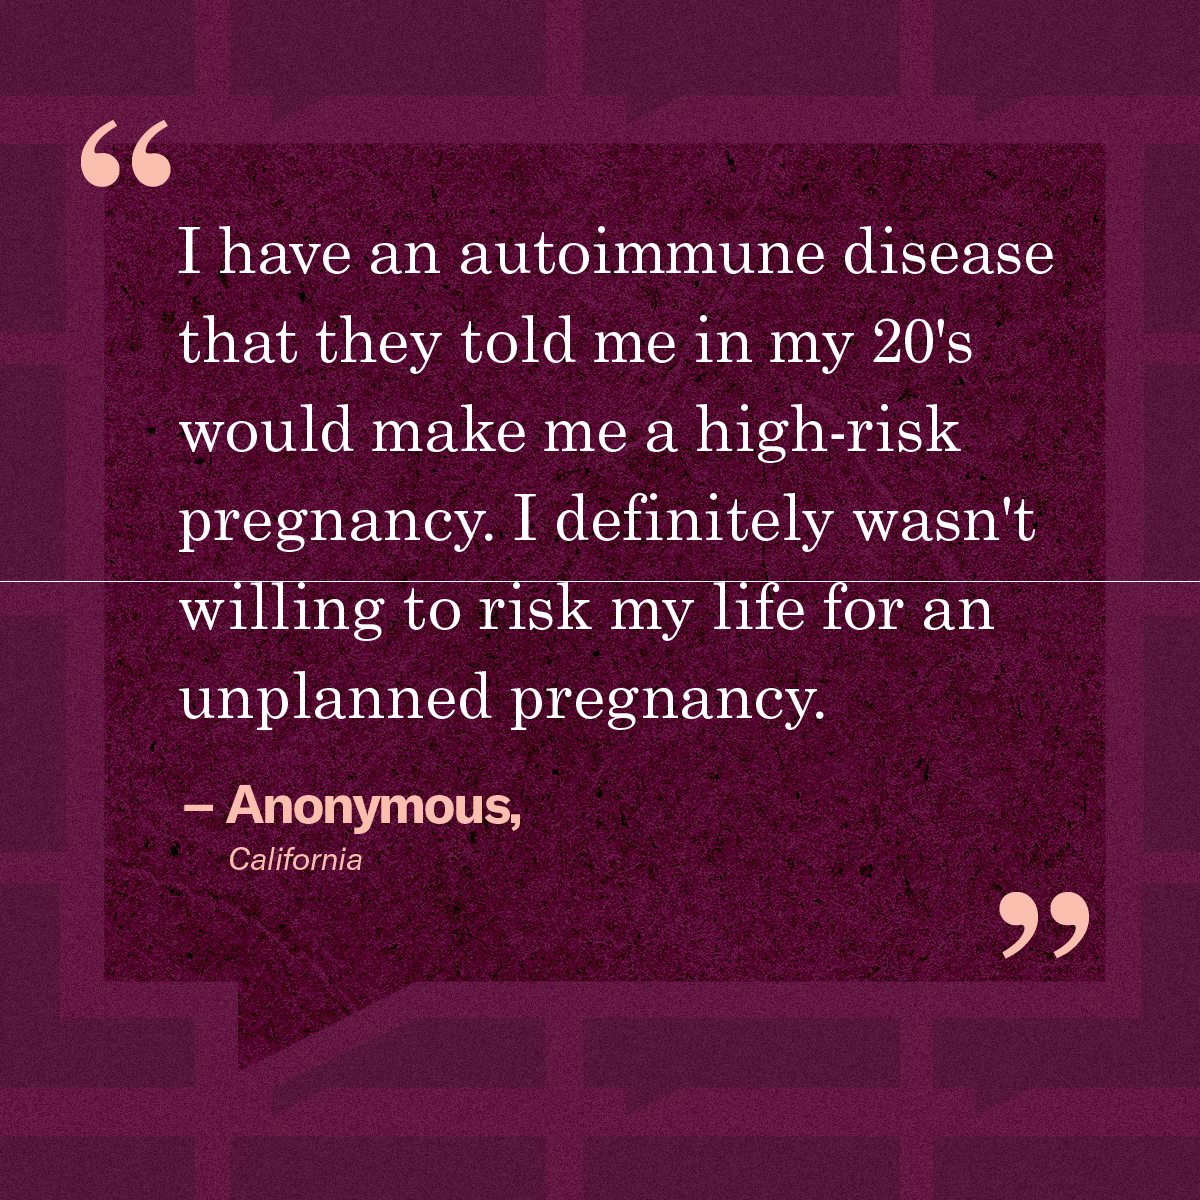 “I have an autoimmune disease that they told me in my 20's would make me a high-risk pregnancy. I definitely wasn't willing to risk my life for an unplanned pregnancy.” – Anonymous, California